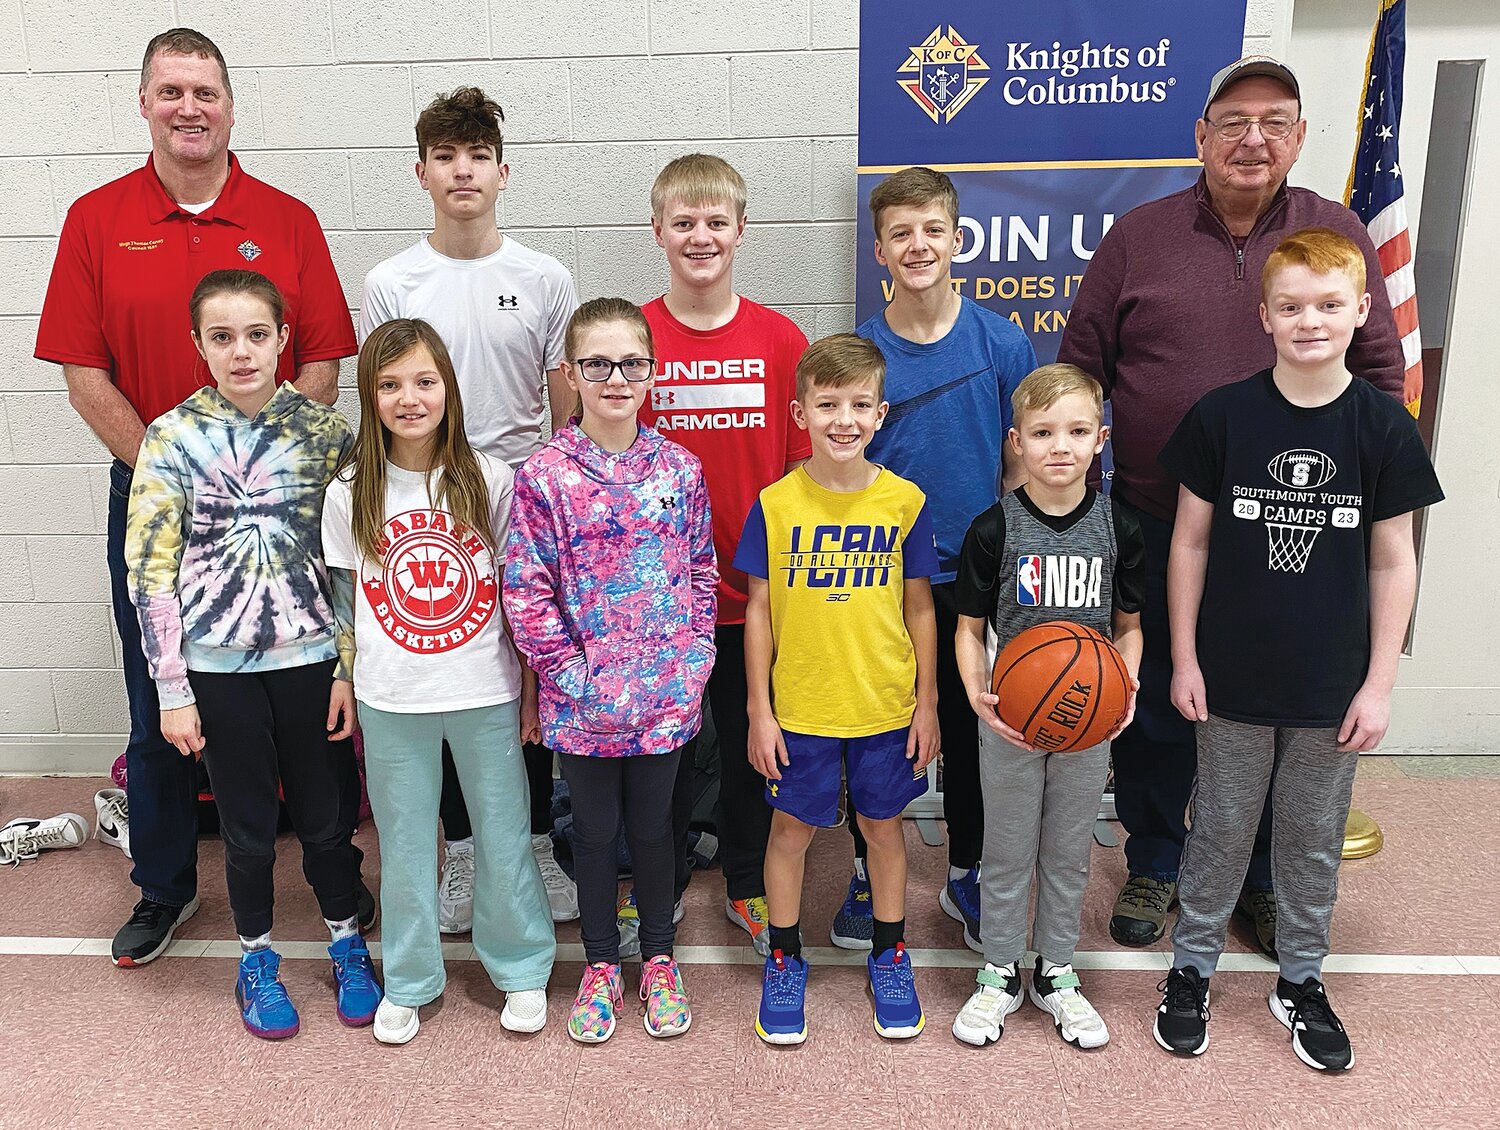 The K of C Council 1591 conducted a Free Throw Championship on Jan. 14 at St. Bernard Catholic Church. Participants pictured, are from left, front row, Chanlie Busch (11 year old girls, first place), Emmerson Busch (9 year old girls, first place), Kenlie Nolan (10 year old girls, first place), Cooper Pierce (10 year old boys, first place), Colton Watson (9 year old boys, first place) and Jaron Swick (13 year old boys, first place); and back row, chairman Michael Scheidler, Jaxonåç Wireman (14 year old boys, first place), Karter Nolan (13 year old boys, second place), Owen Pierce (14 year old boys, second place) and Bernie Williams, K of C Council 1591 Grand Knight. First place winners advance to the regional finals at 1 p.m. Feb. 18 at the Clinton County Boys & Girls Club in Frankfort.